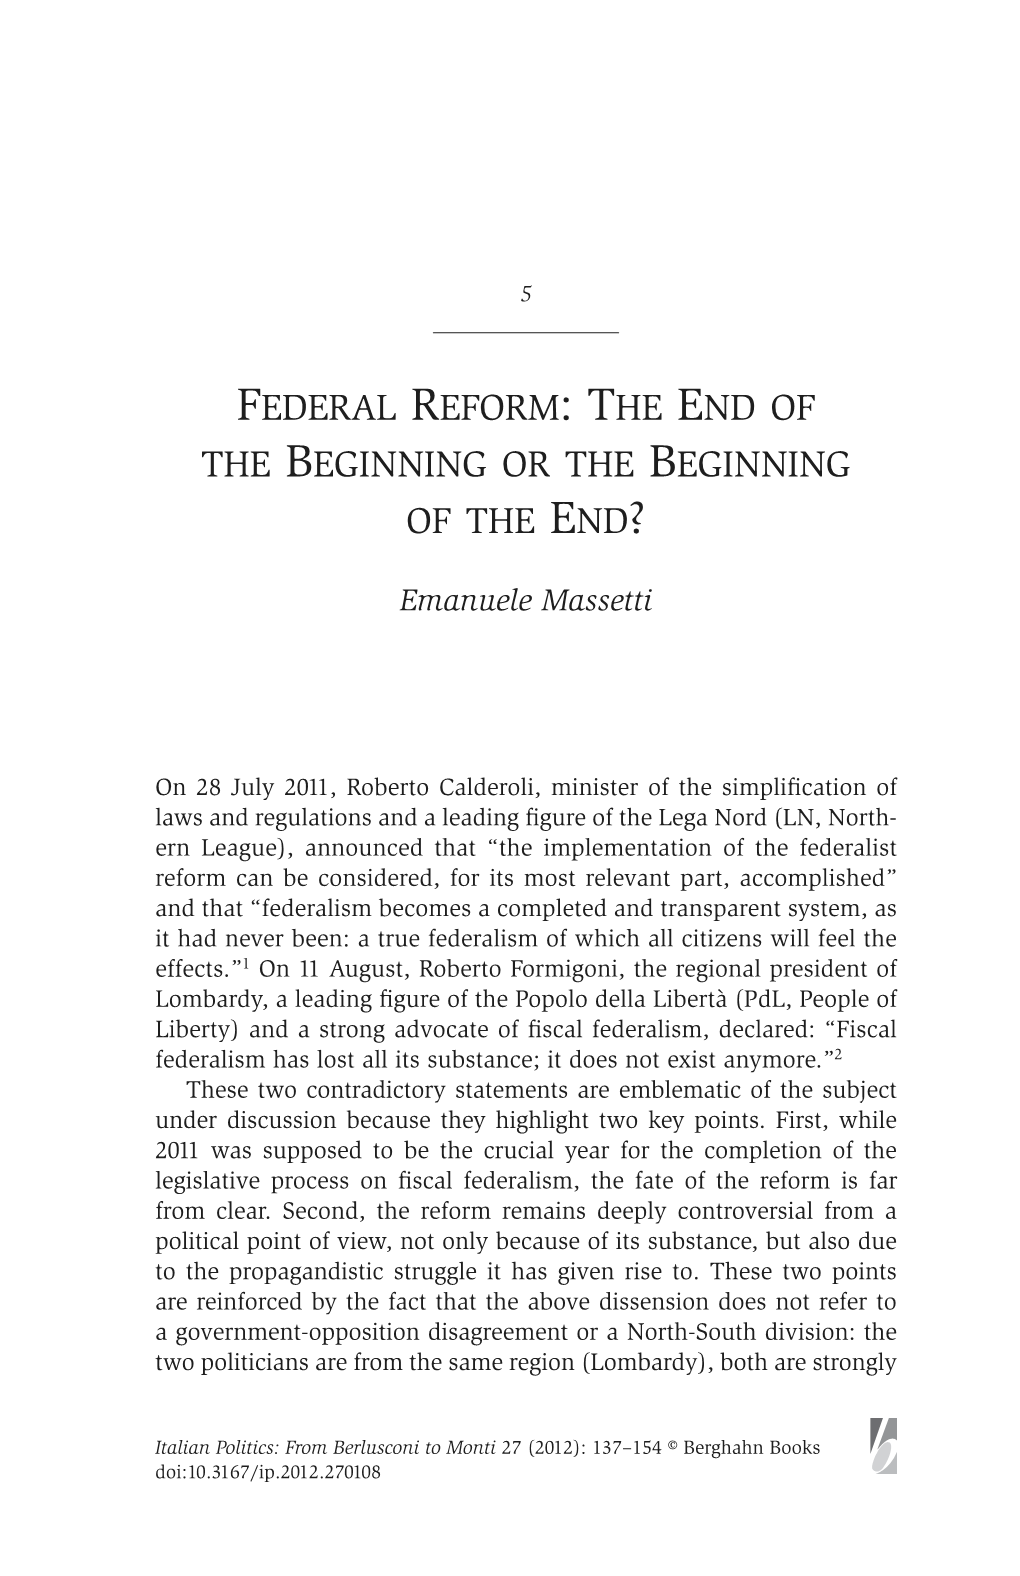 Federal Reform: the End of the Beginning Or the Beginning of the End?